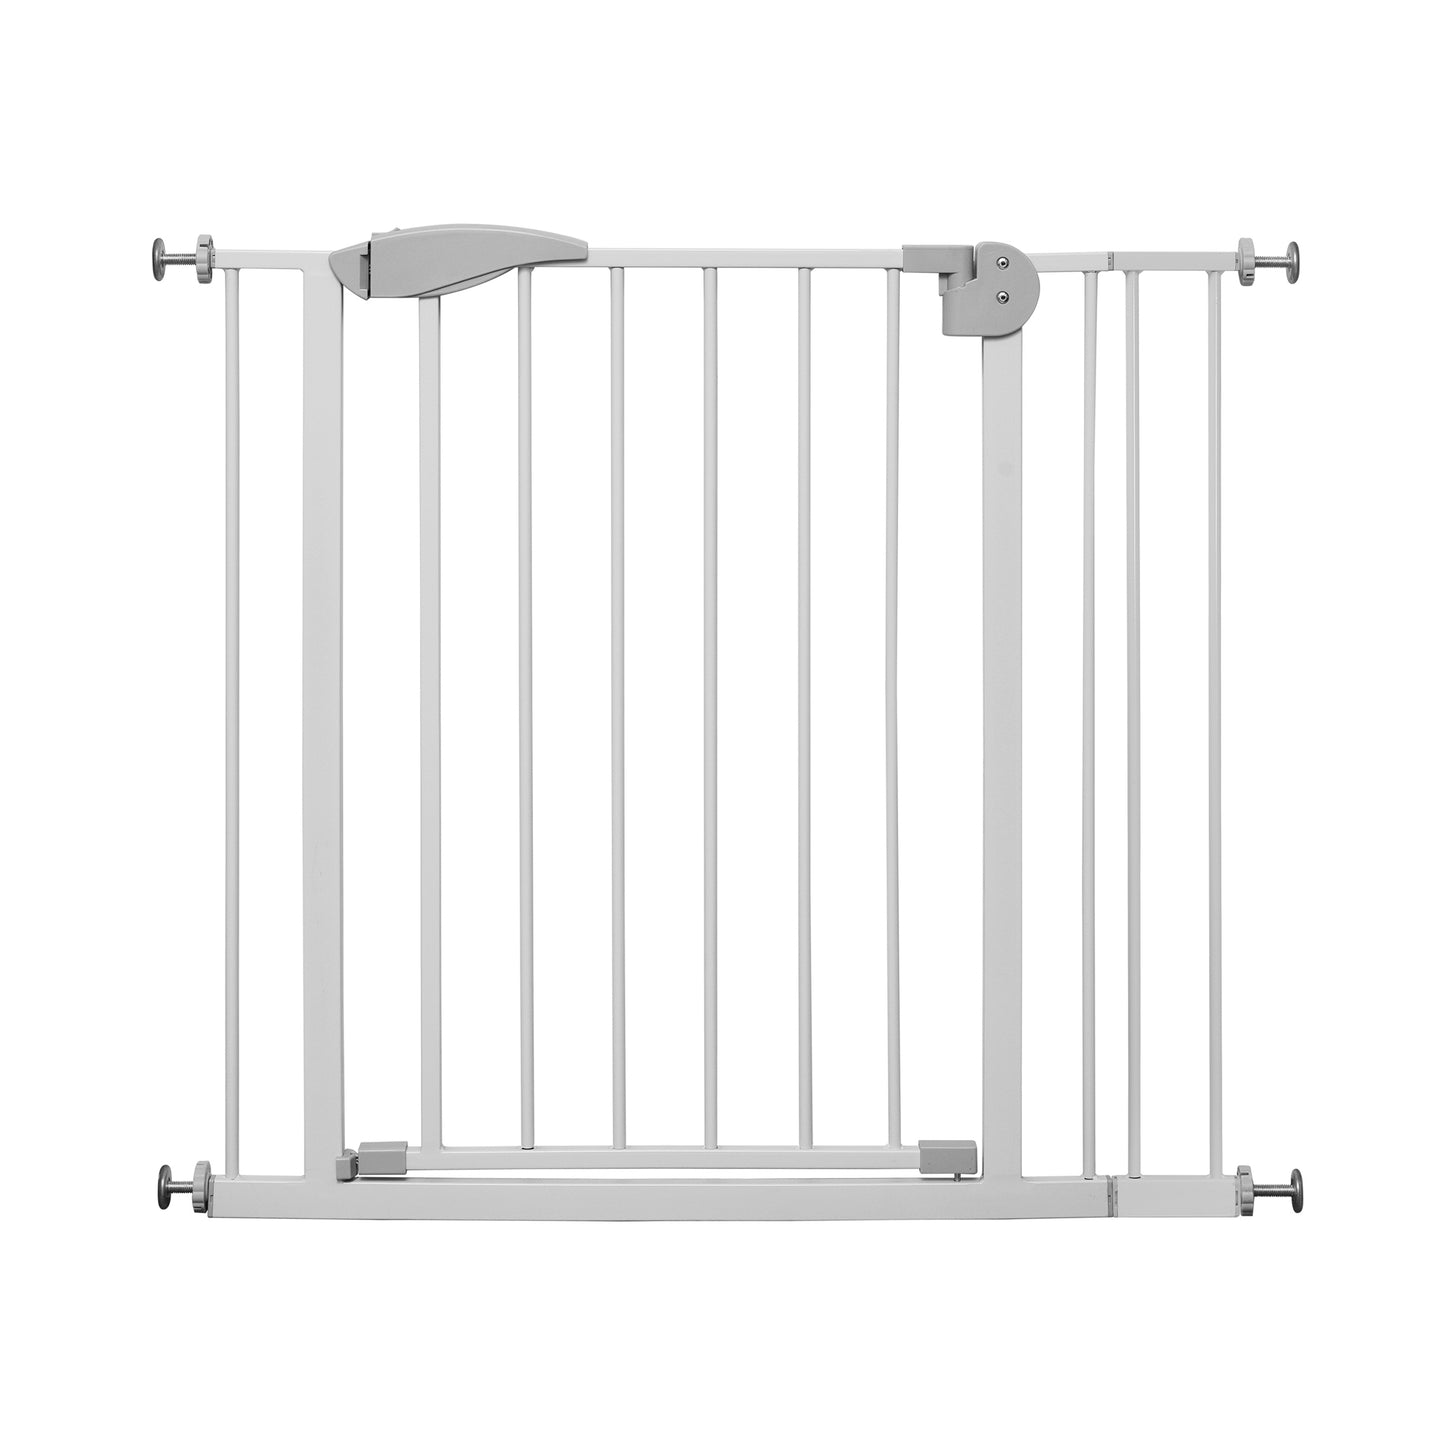 Easy Assembly Pet Gate Safety Gate Durability Dog Gate For House, Stairs, Doorways, Fits Openings 29.5" to 32"